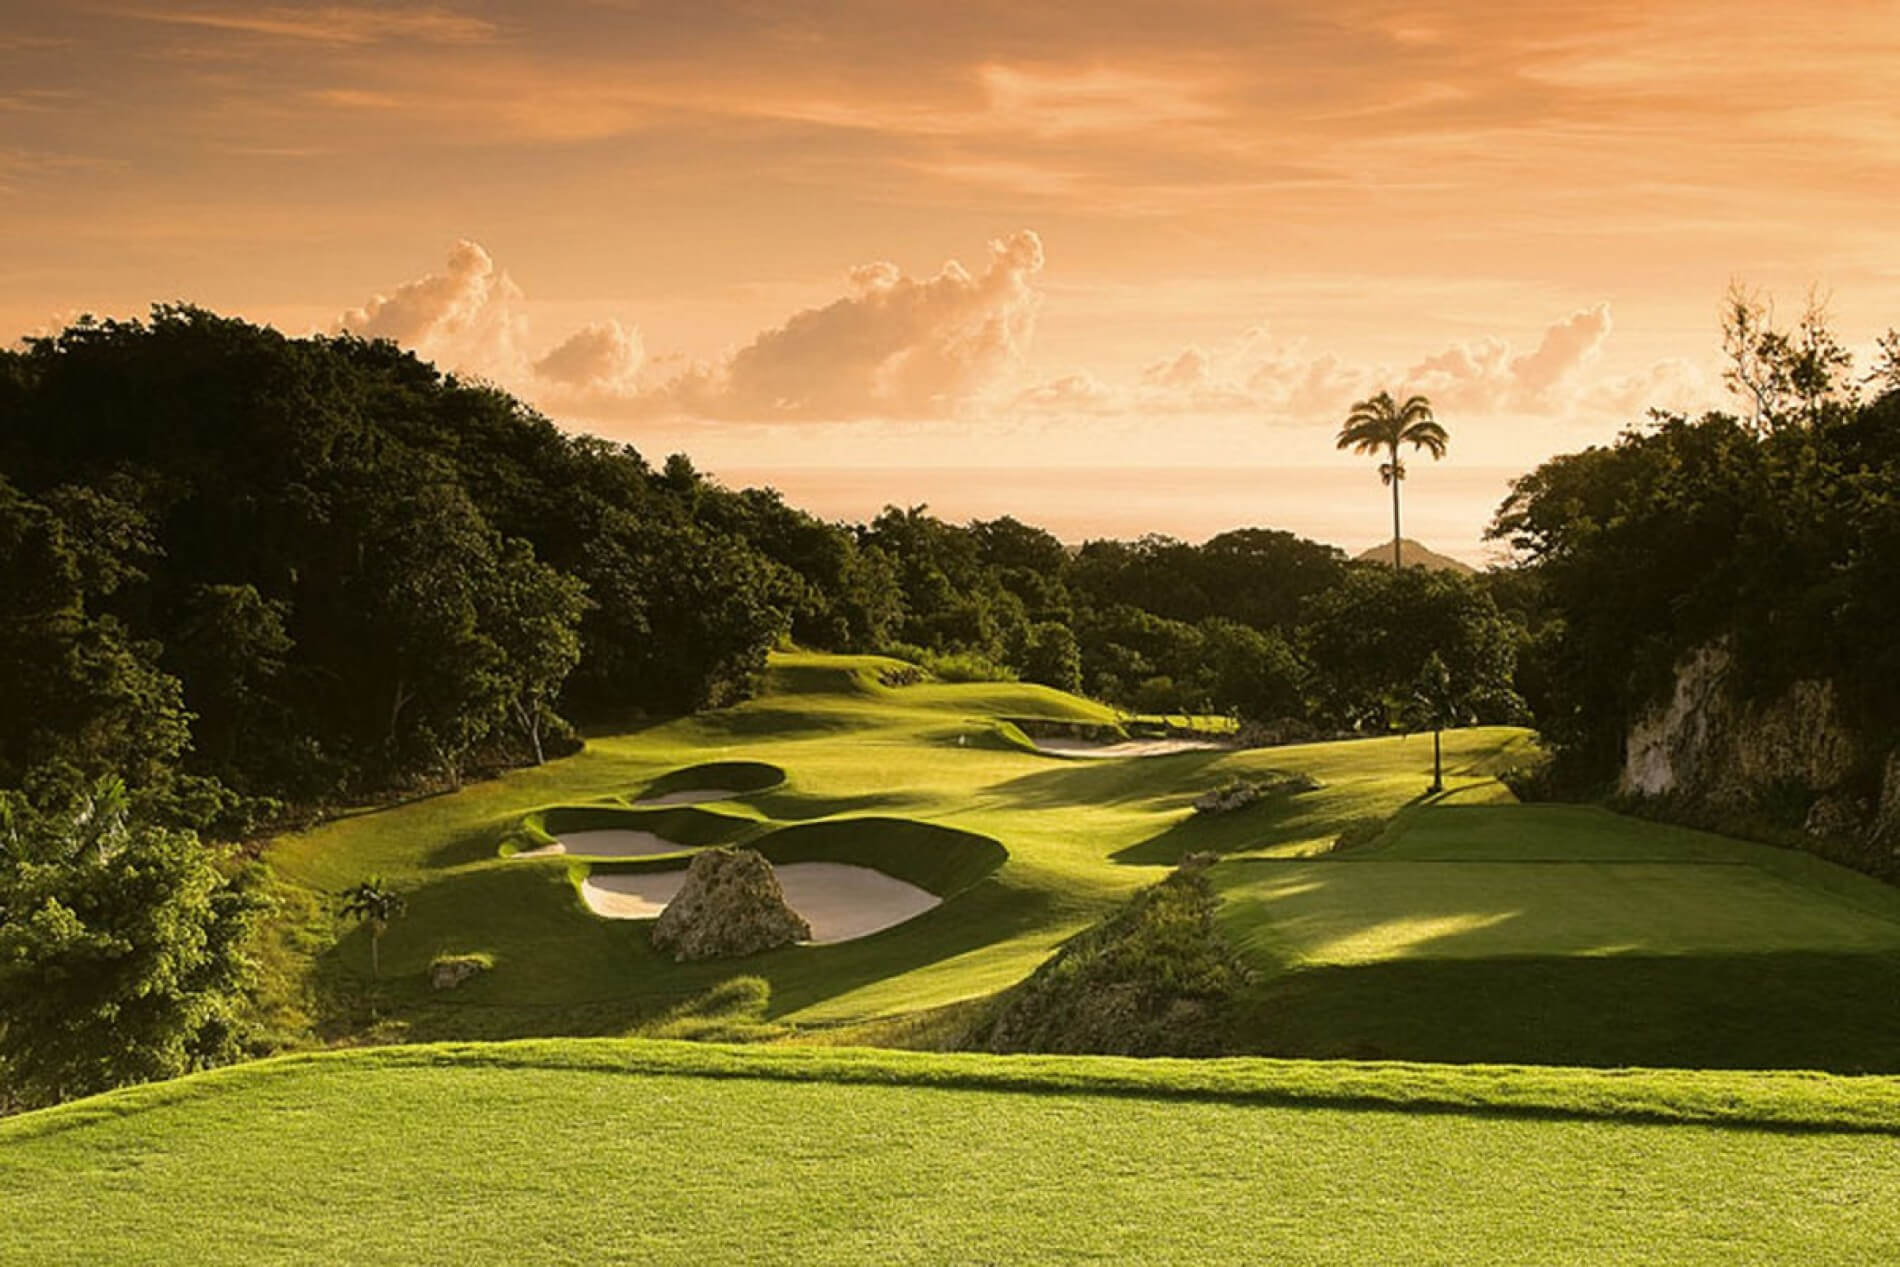 http://the%20tree%20house%20apes%20hill%20St%20James%20Barbados%20golf%20course